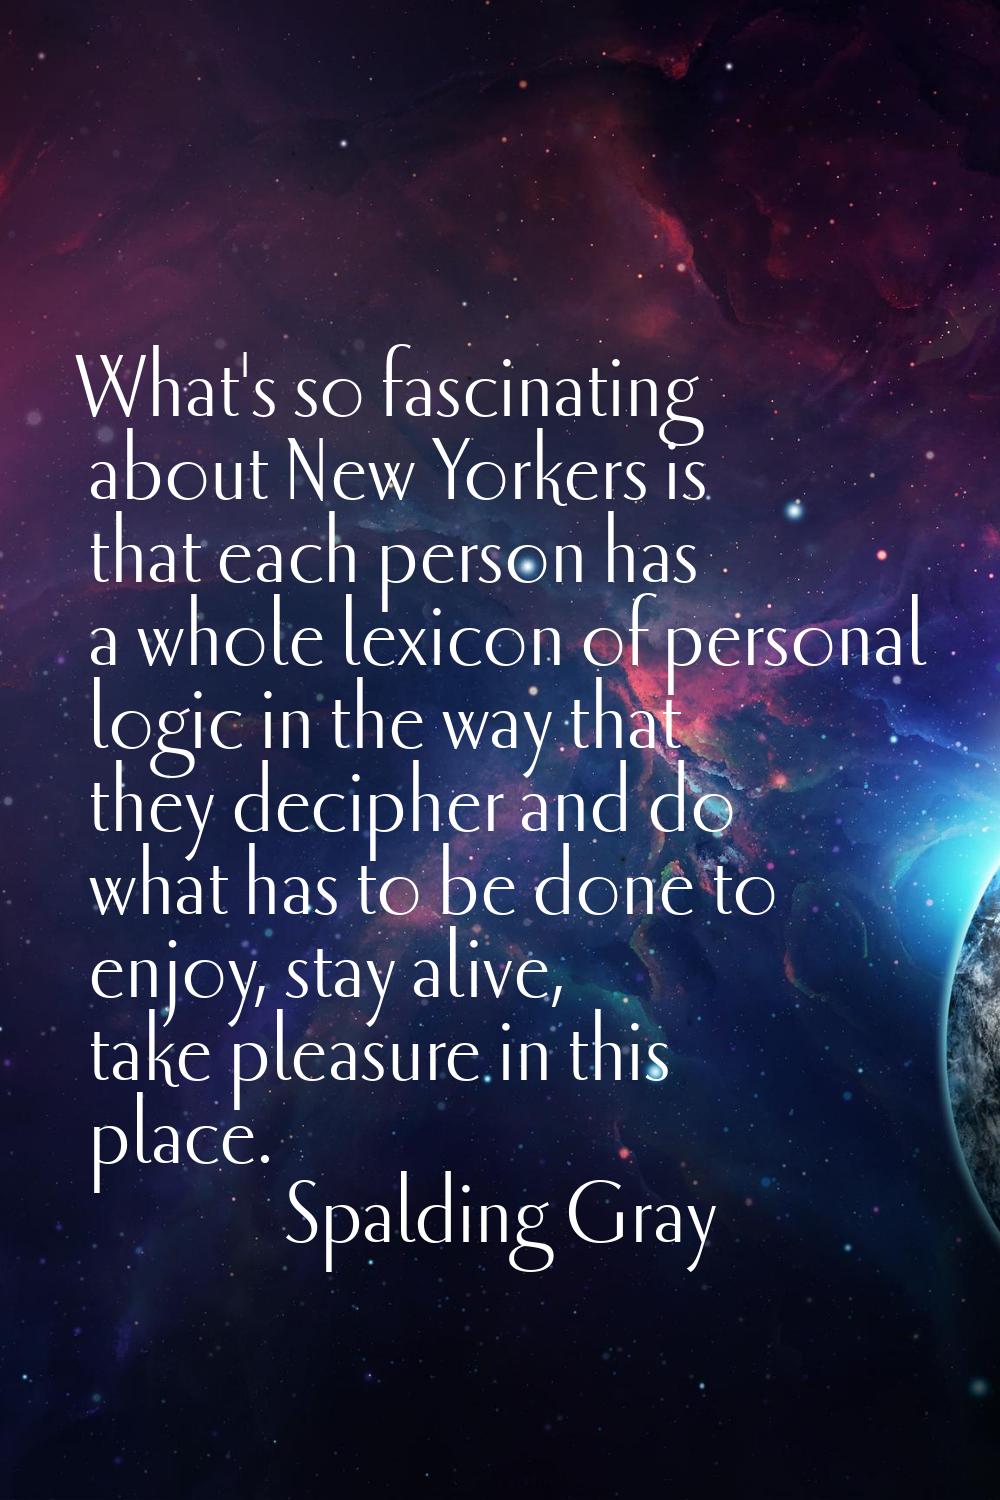 What's so fascinating about New Yorkers is that each person has a whole lexicon of personal logic i